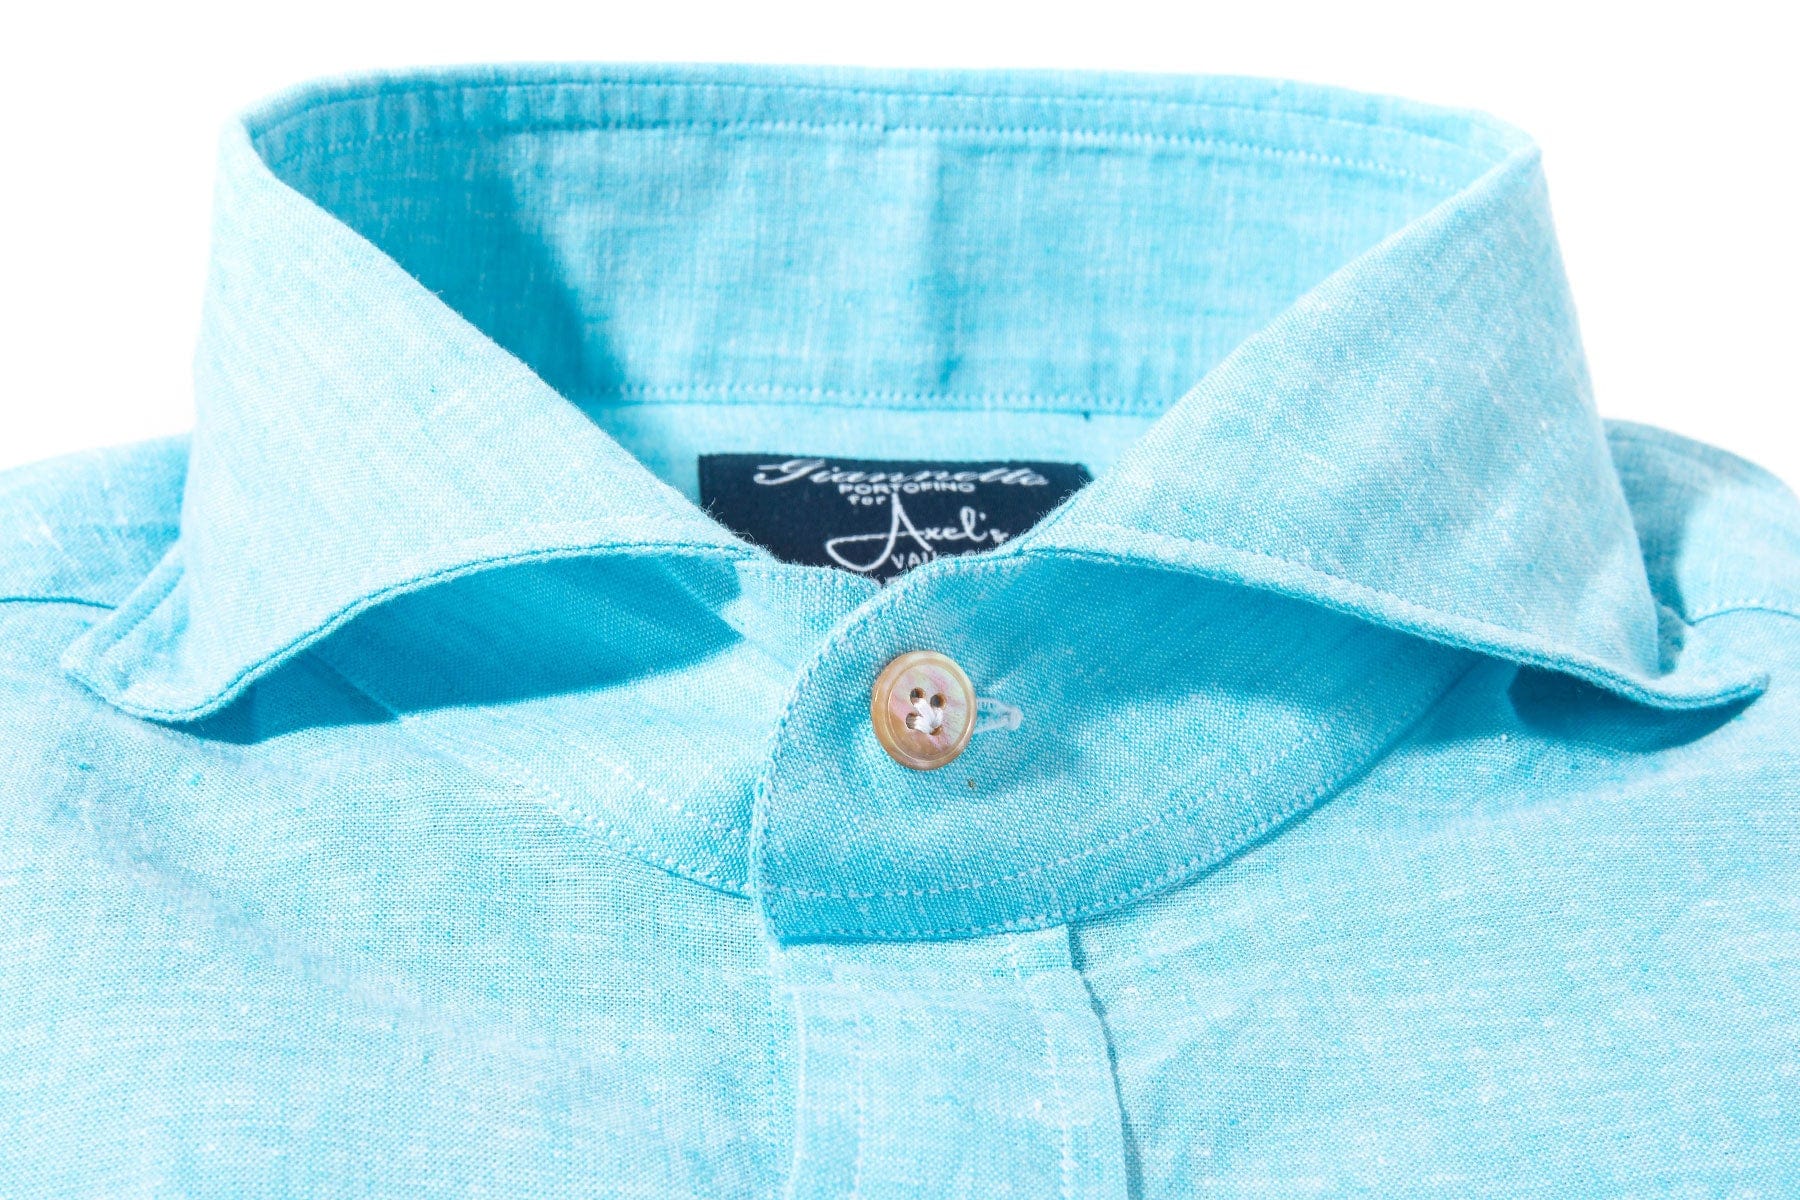 Mach Linen Cotton Snap Shirt in Turquoise - AXEL'S